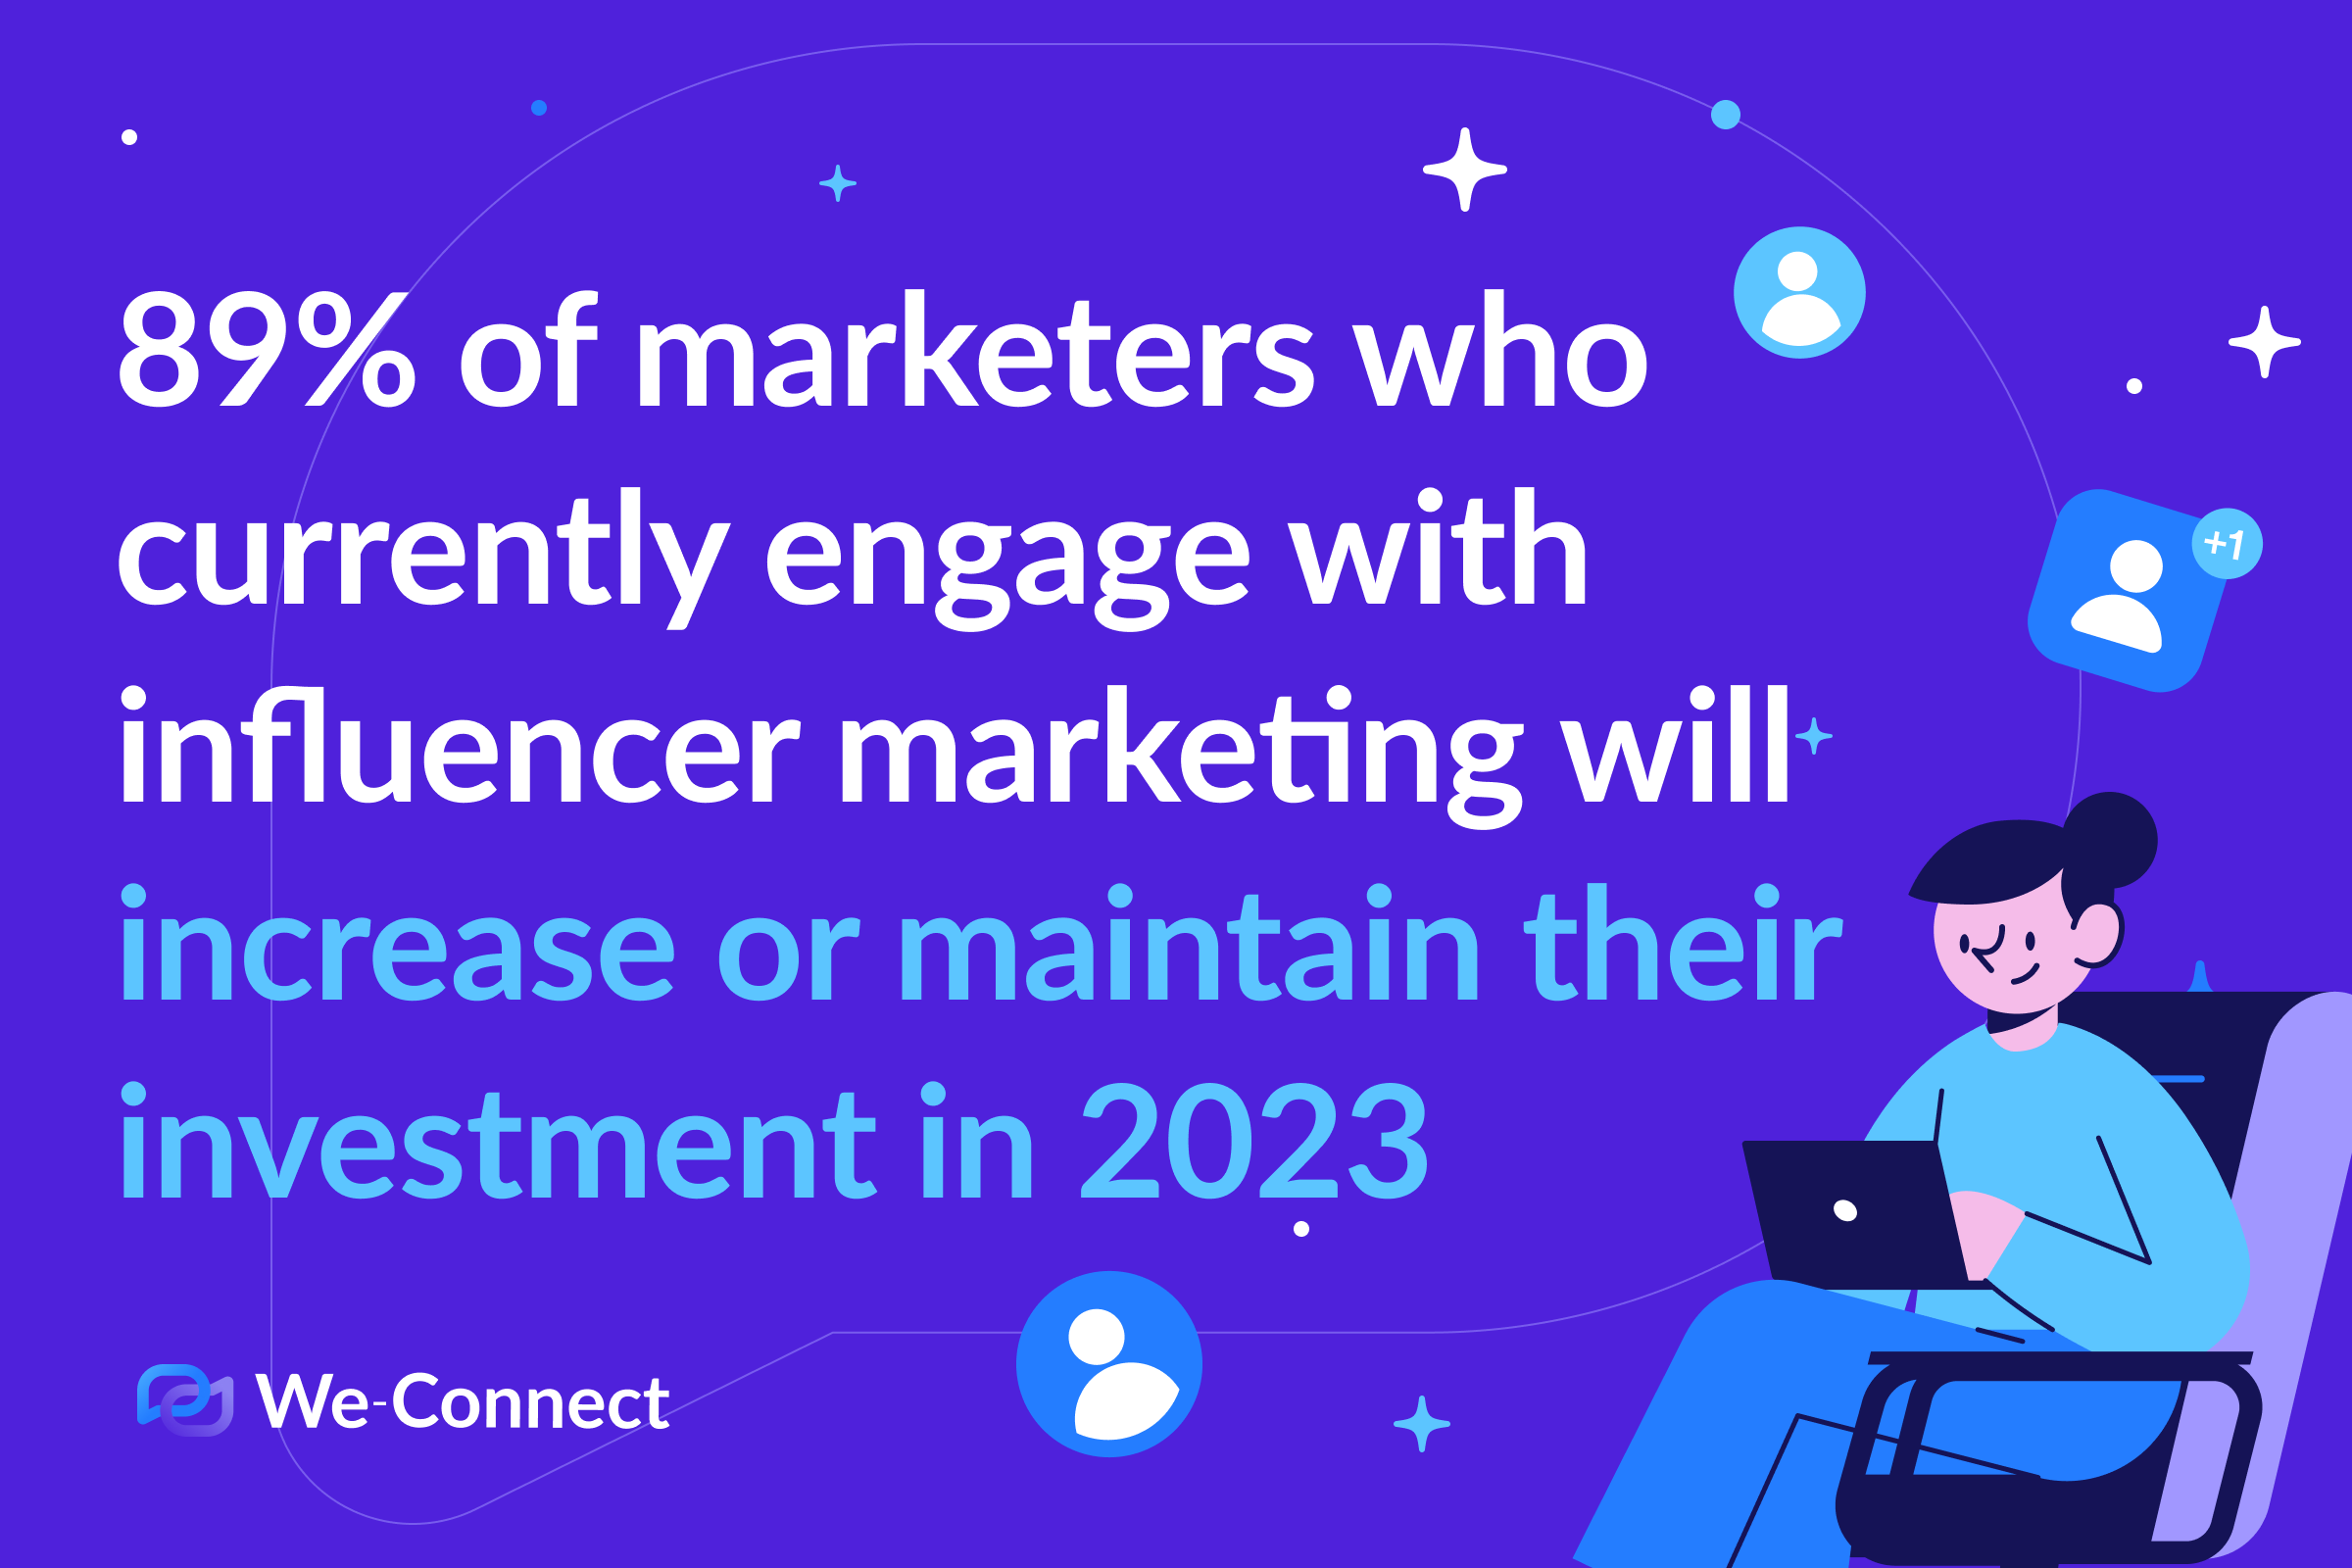 89% of marketers who currently engage with influencer marketing will increase or maintain their investment in 2023